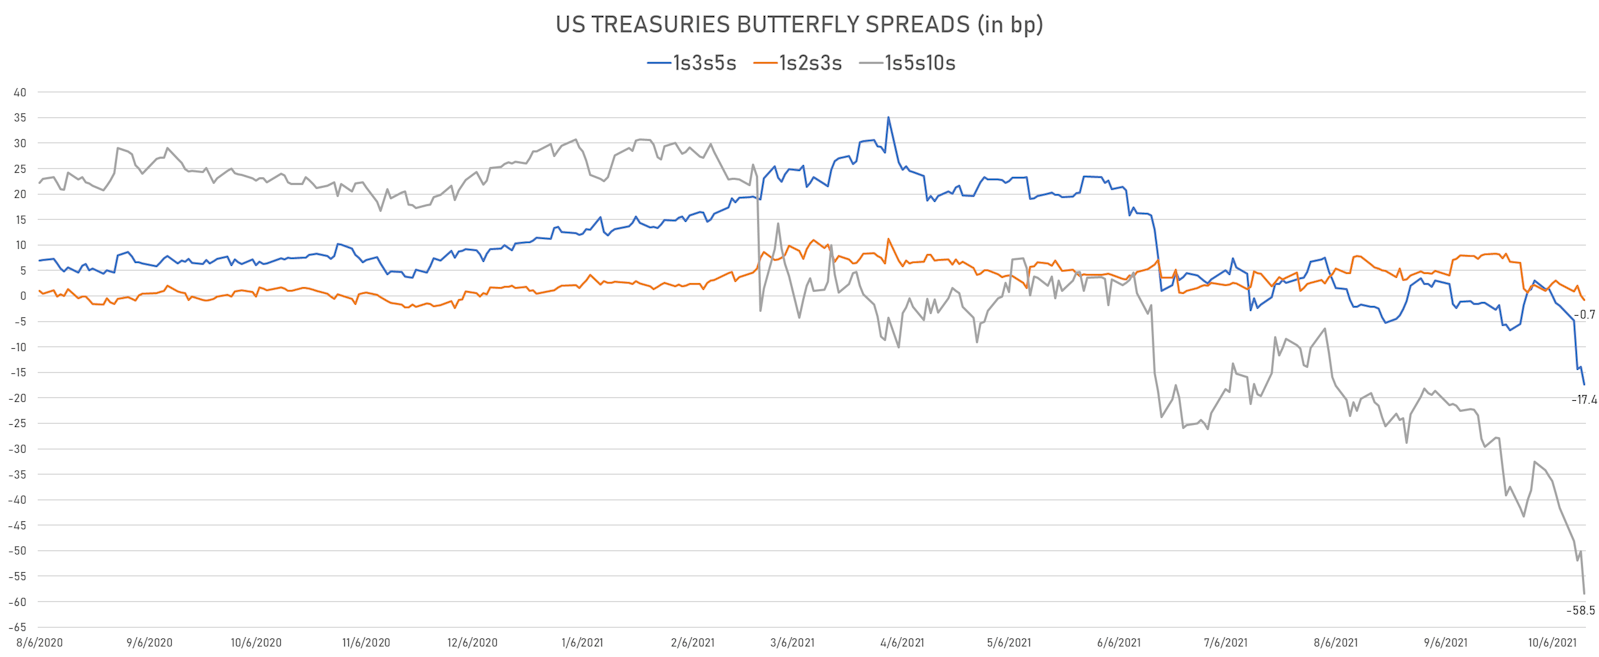 US Treasuries Butterfly Spreads Showing The Front-Loaded Rises In Rates | Sources: ϕpost, Refinitiv data